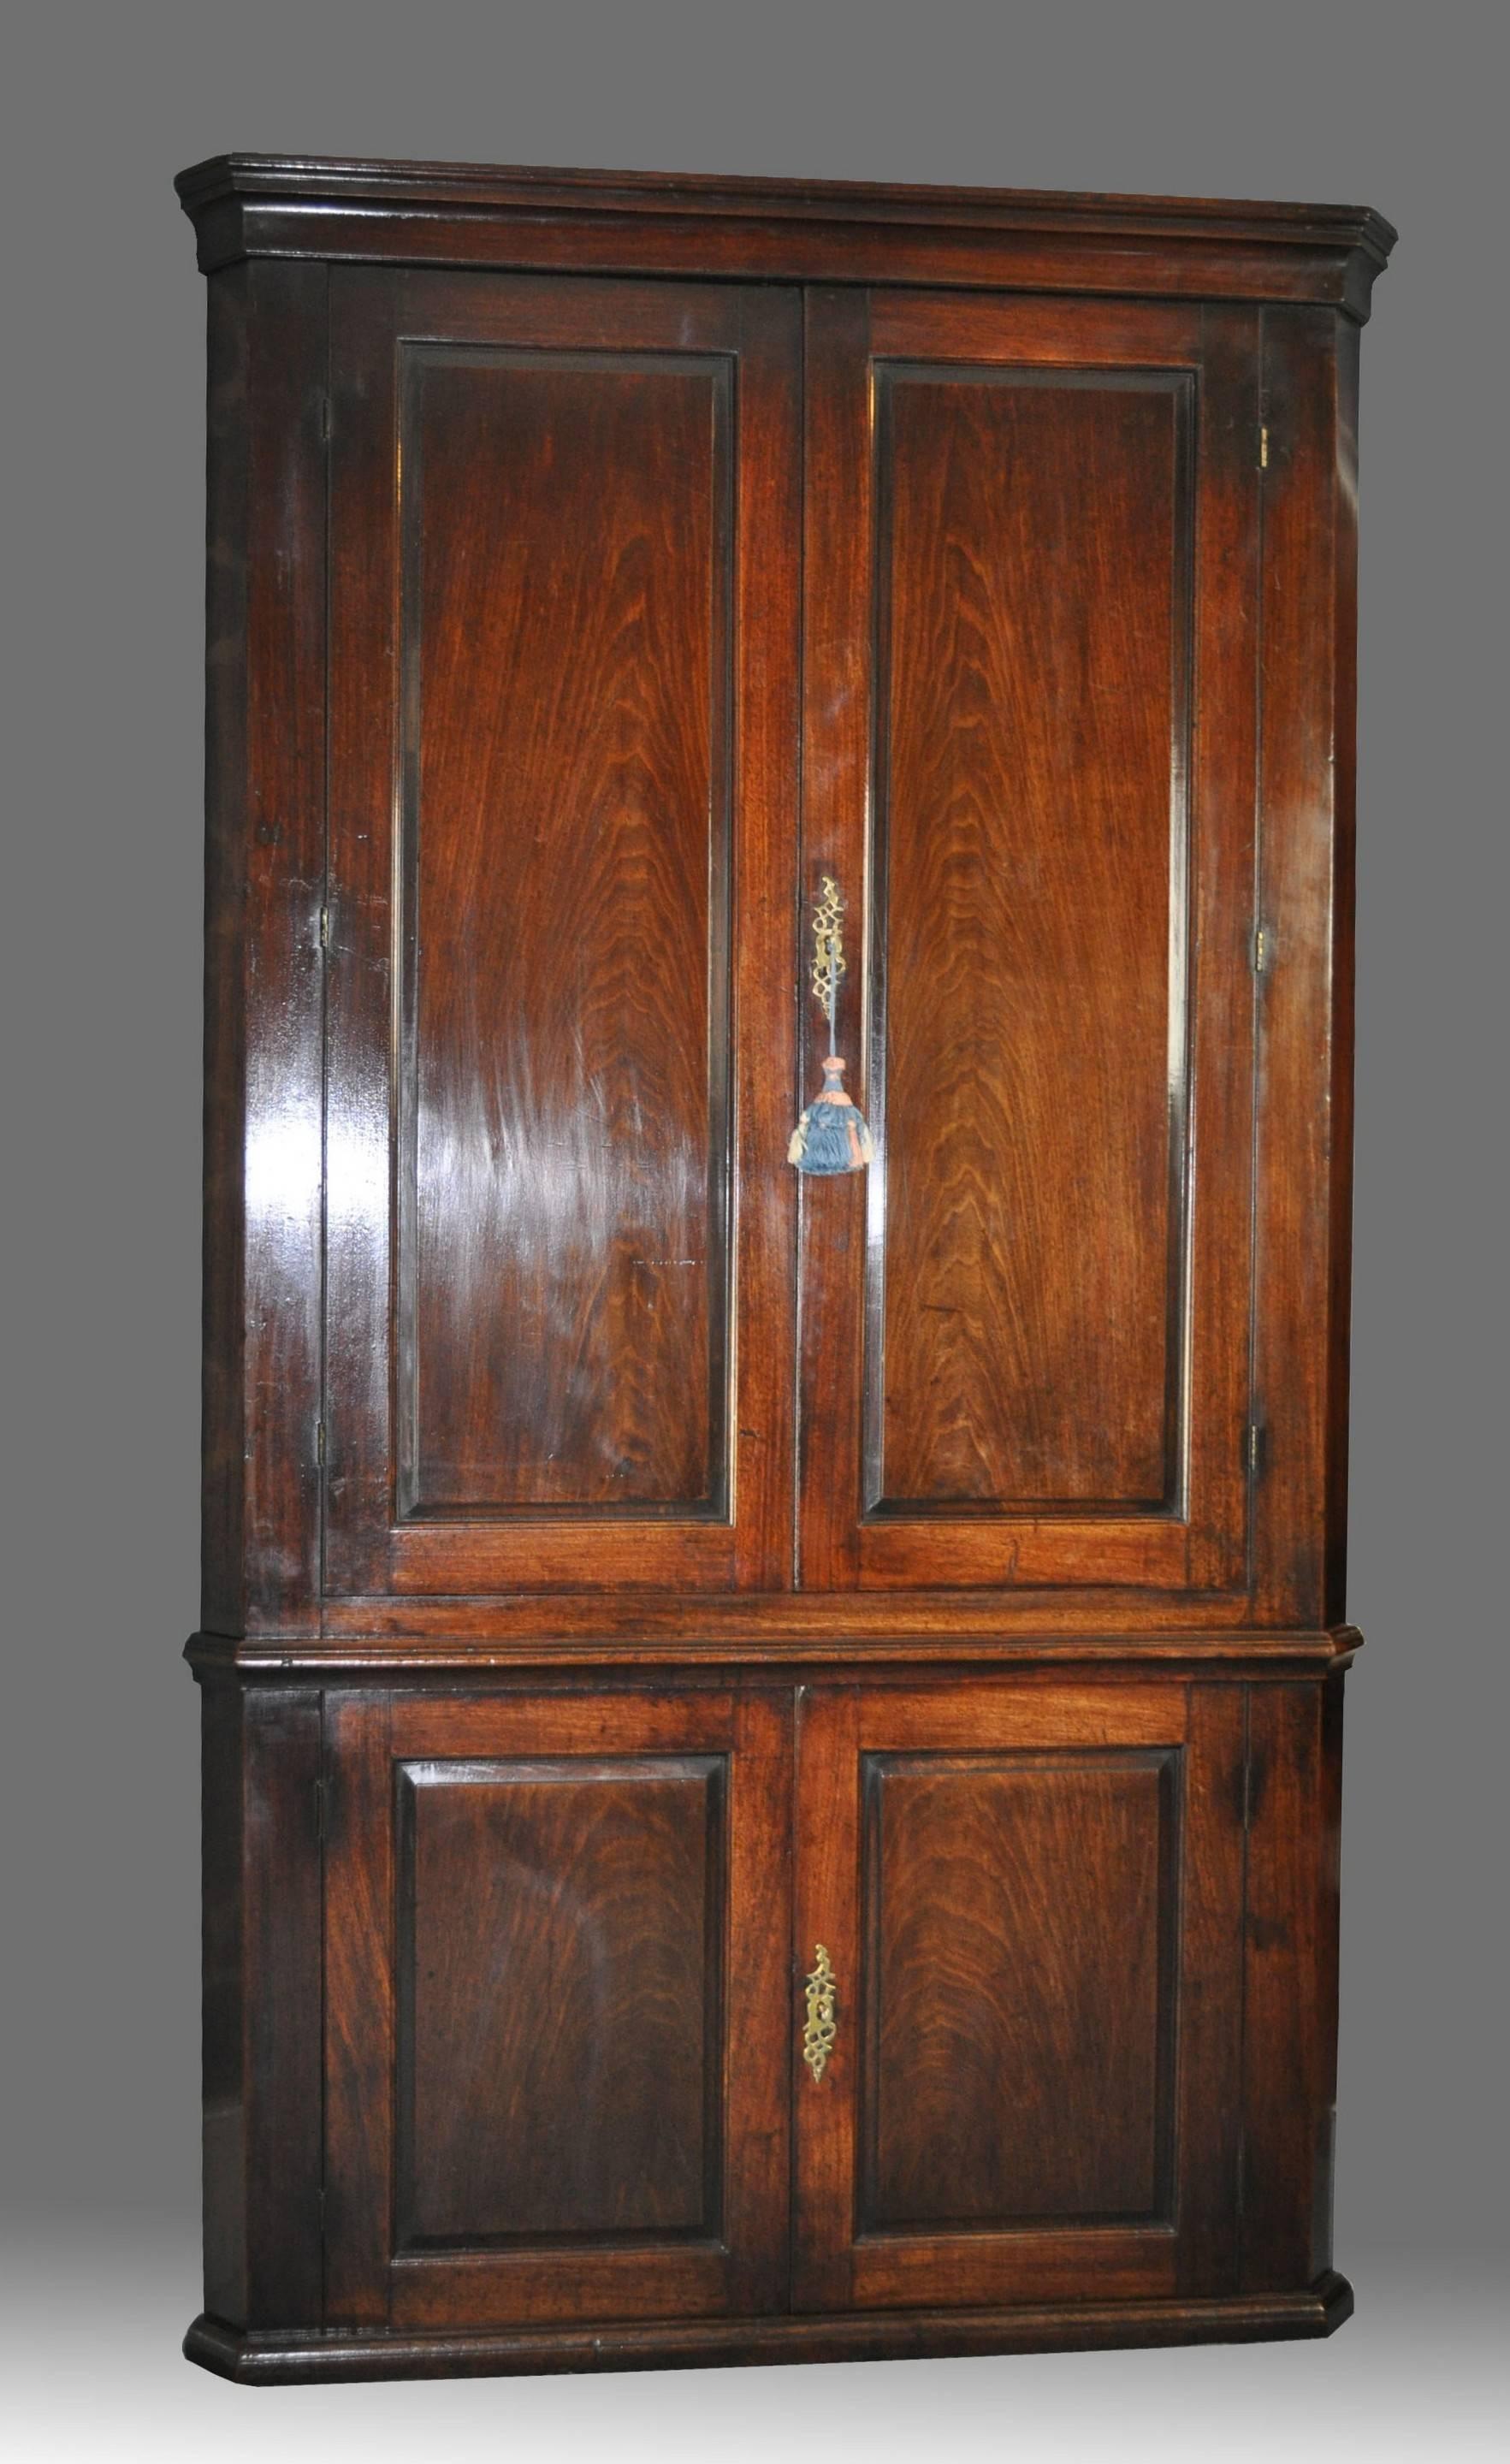 A fine quality mid-18th century mahogany four-door, full height, standing corner cupboard with plain cavetto cornice above a pair of fielded panelled doors enclosing shaped shelves and an internal, flap- covered compartment, above a waist moulding